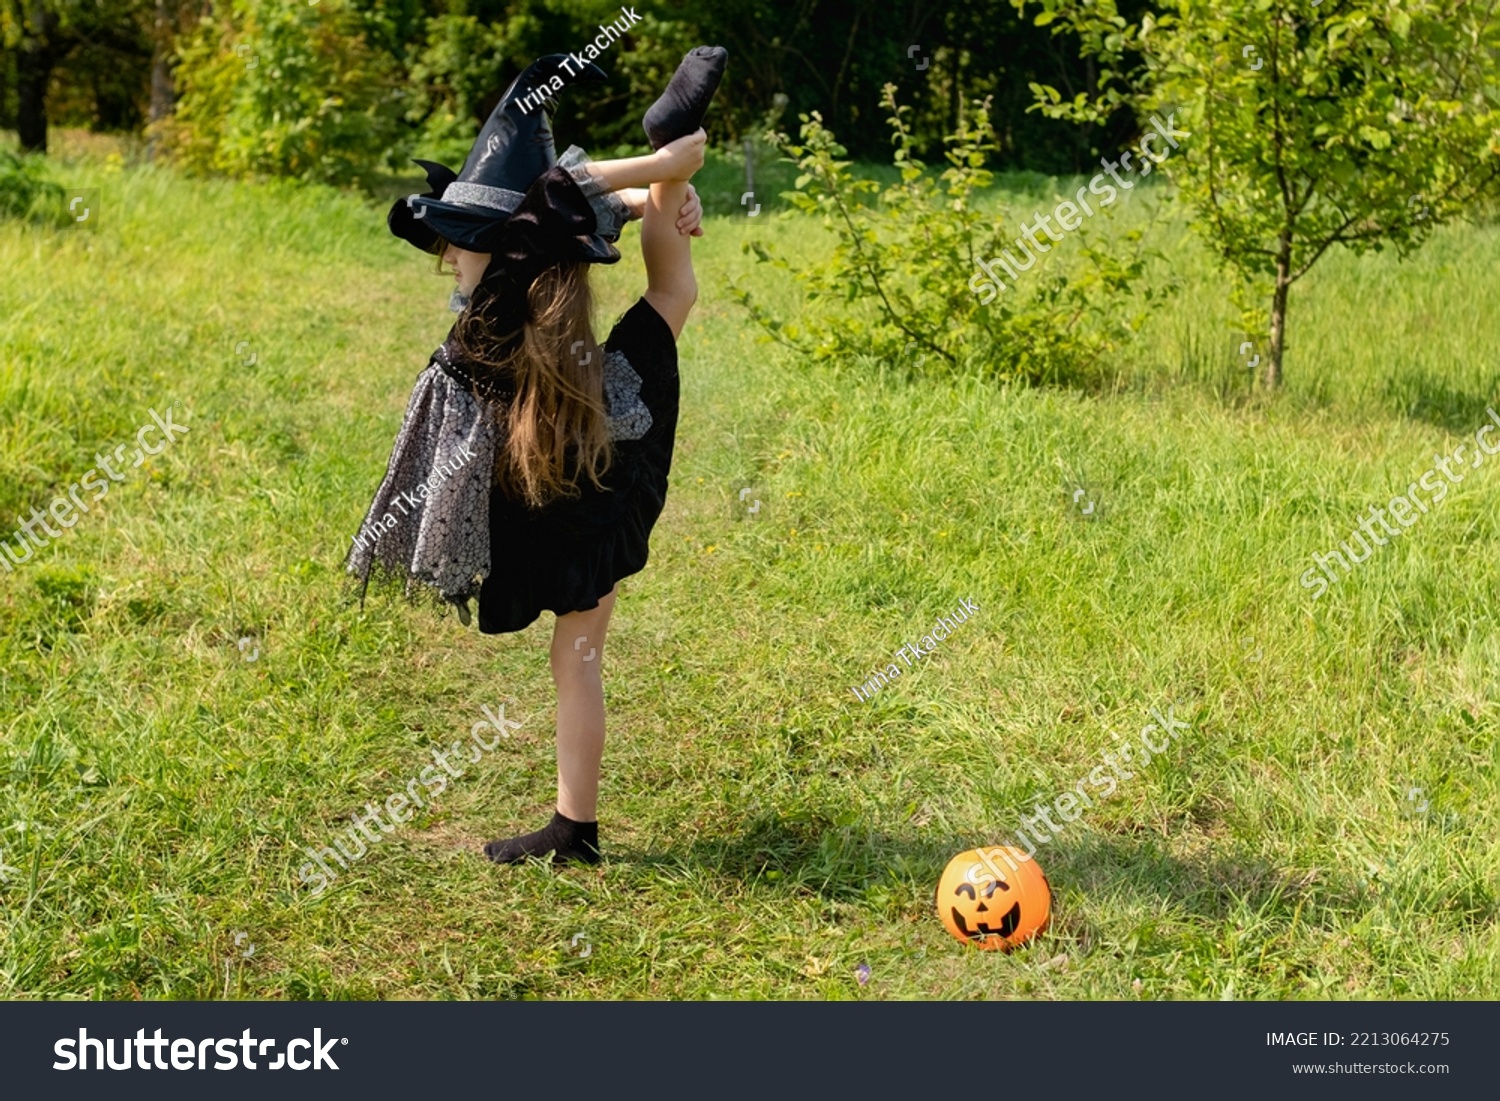 Halloween girl going to collect candy. Trick-or-treating. Guising. Jack-o-lantern. Child in carnival costume witch outdoors. Celebrate halloween. Girl in forest smiling and holding basket of sweets #2213064275